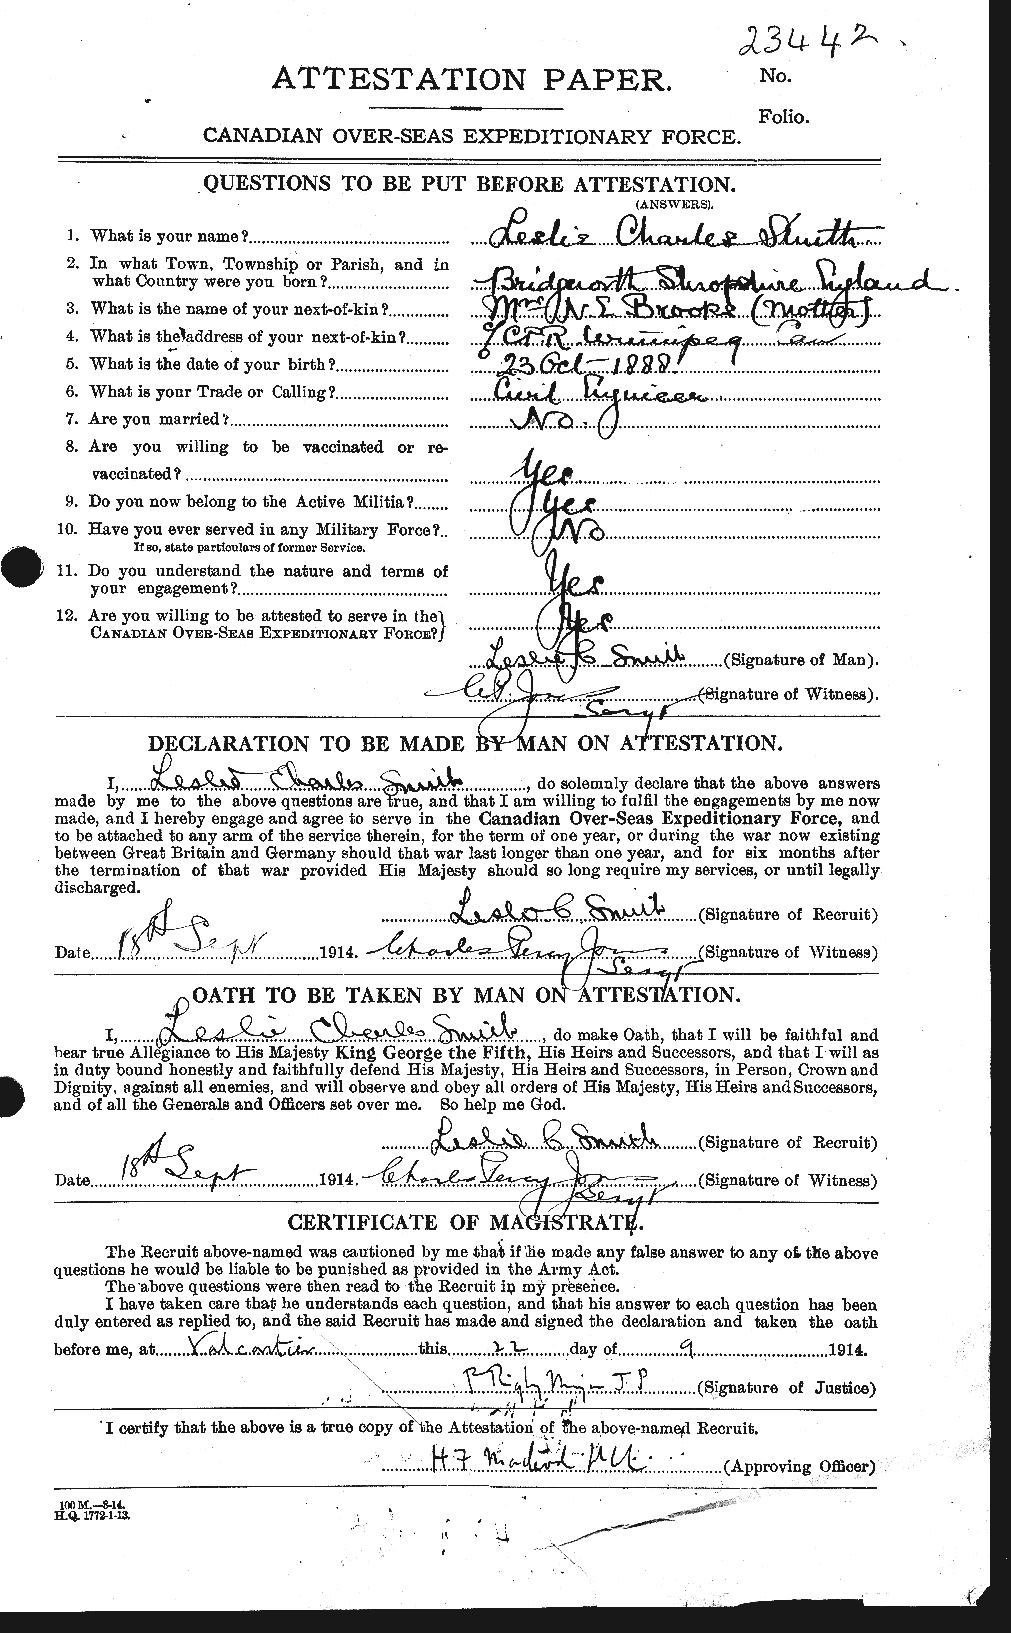 Personnel Records of the First World War - CEF 106136a